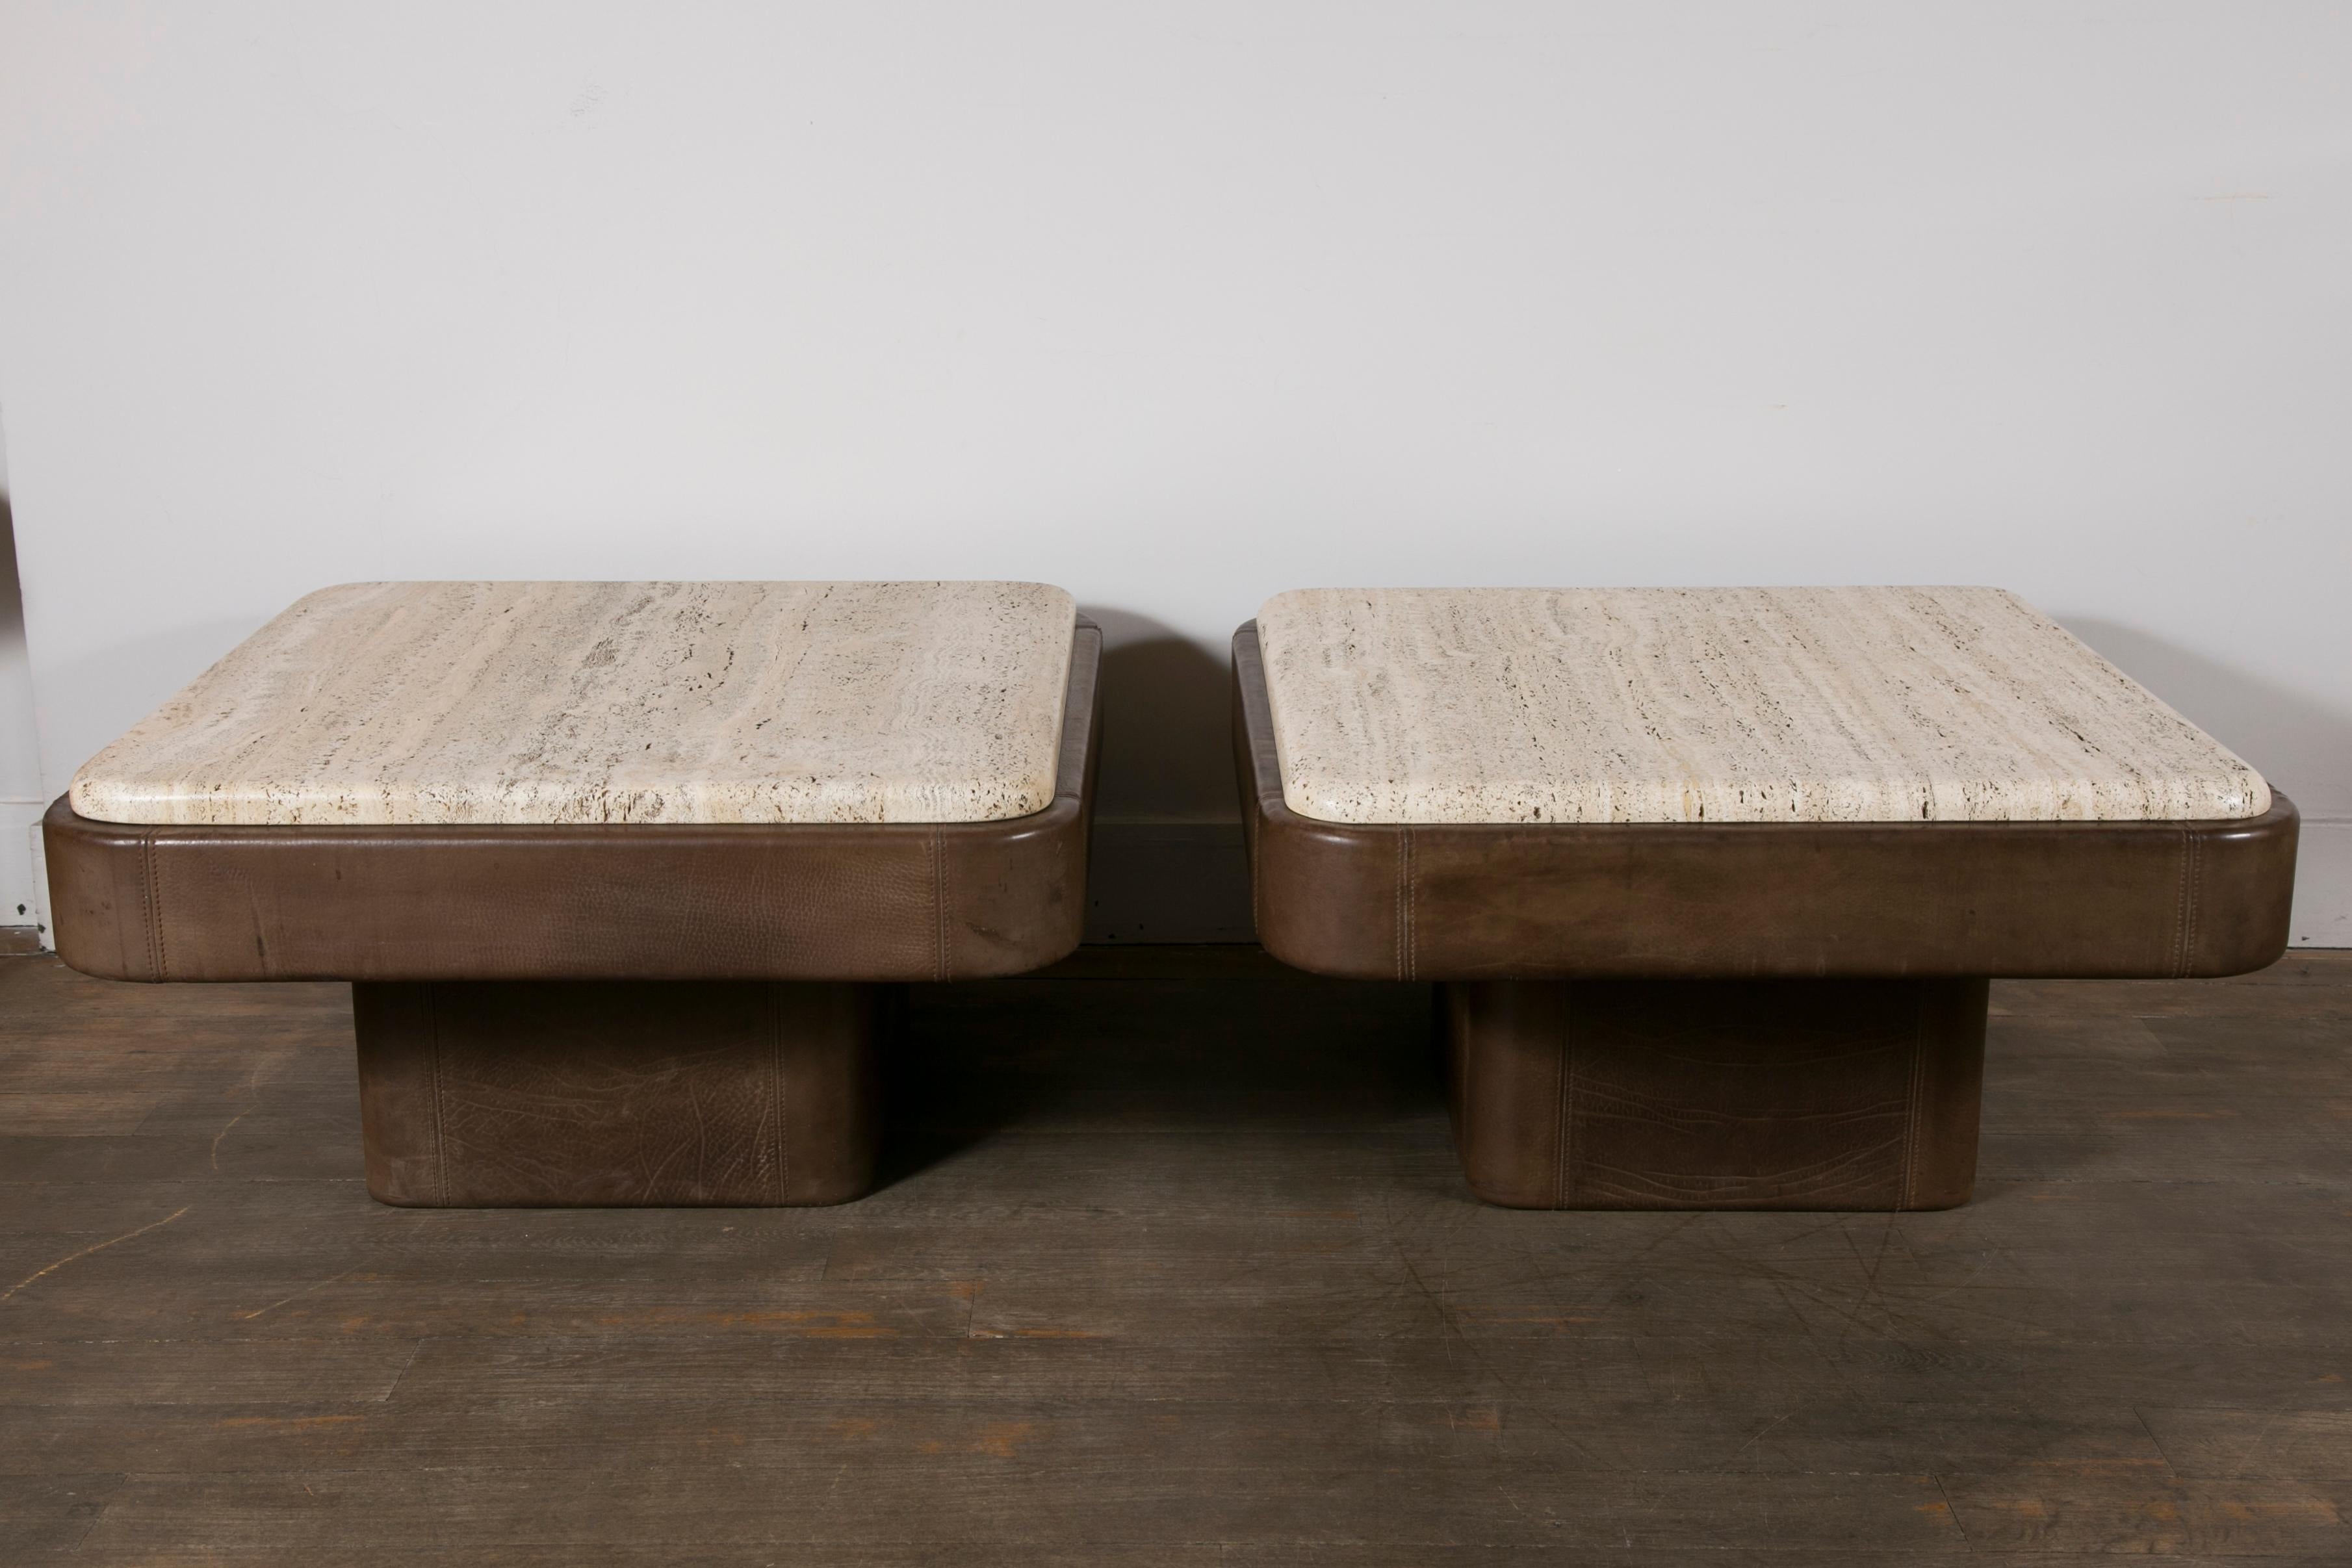 Pair of brown leather end tables with thick travertine tops
Edited by De Sede.
Switzerland, circa 1970.

Dimensions: 
Height 41 cm (16.1 in.)
Width 80 cm (31.5 in.)
Depth 80 cm (31.5 in.)

Travertine top 75 x 75 cm (29.5 x 29.5 in.).
 